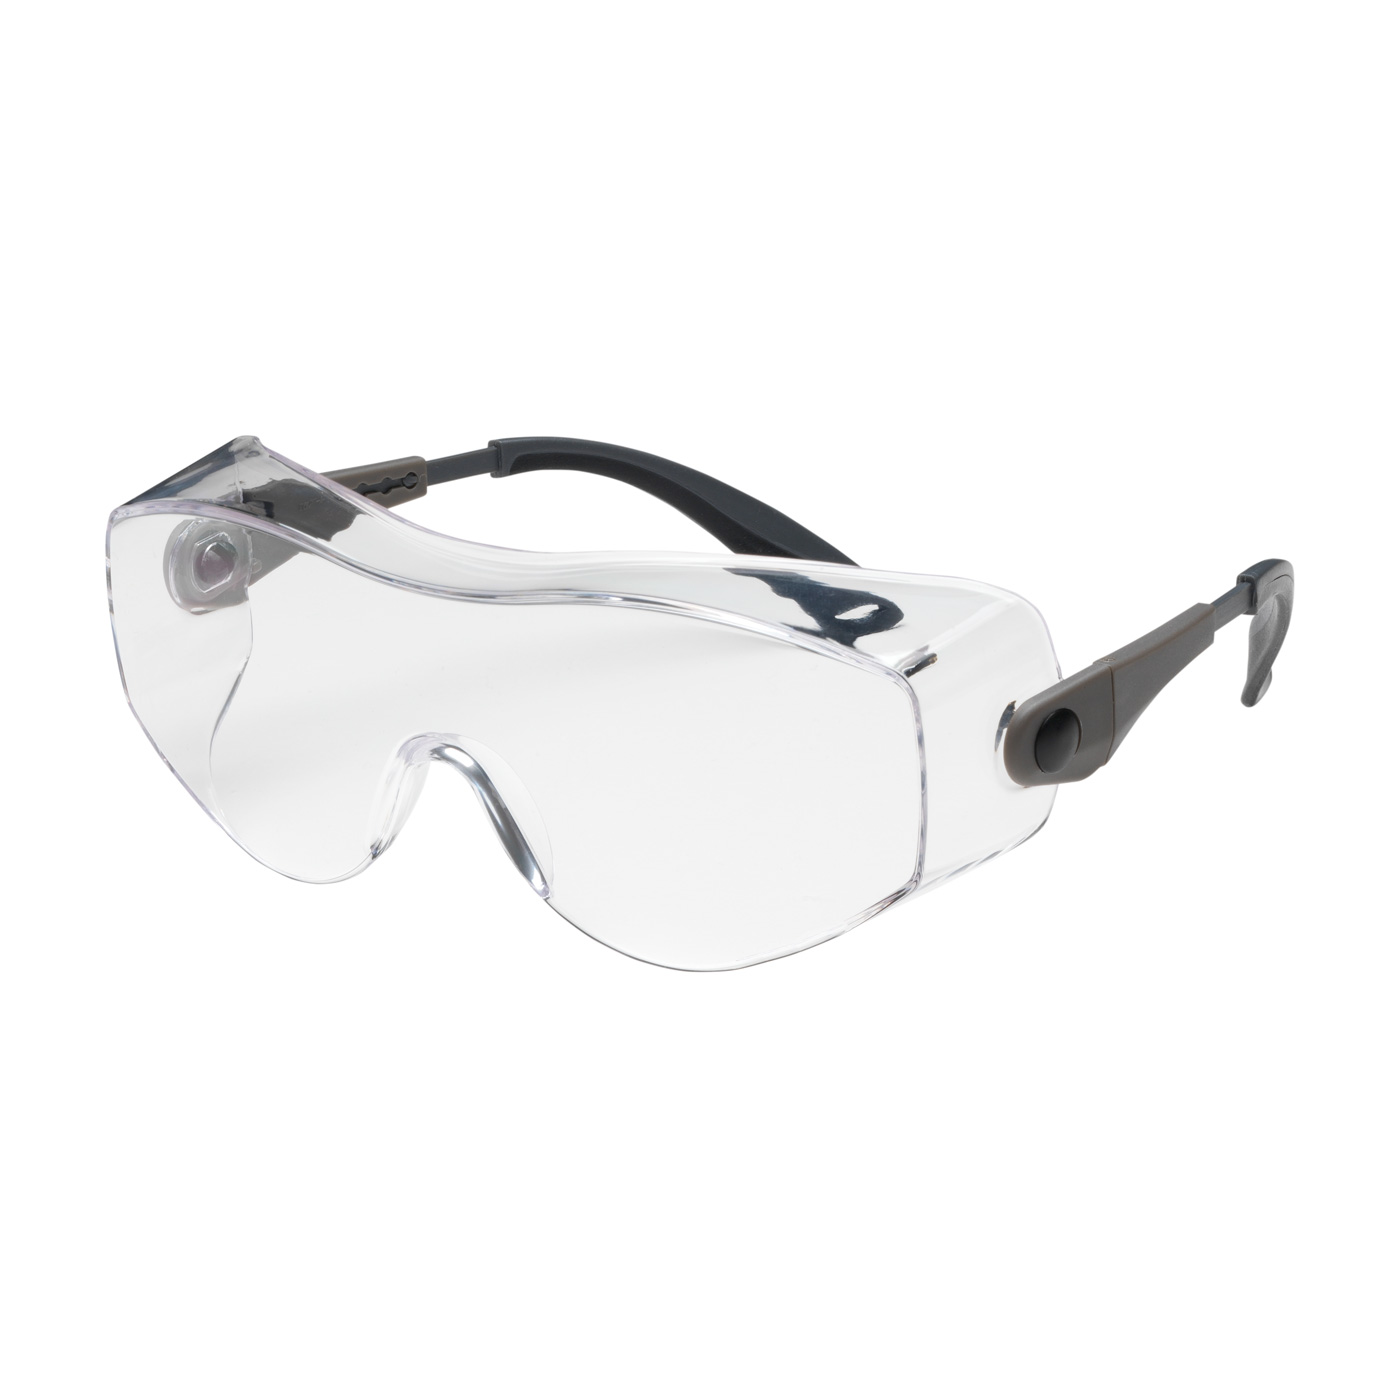 #250-98-0080 PIP OverSite™ OTG Rimless Safety Glasses with Black / Gray Temple, Clear Lens 